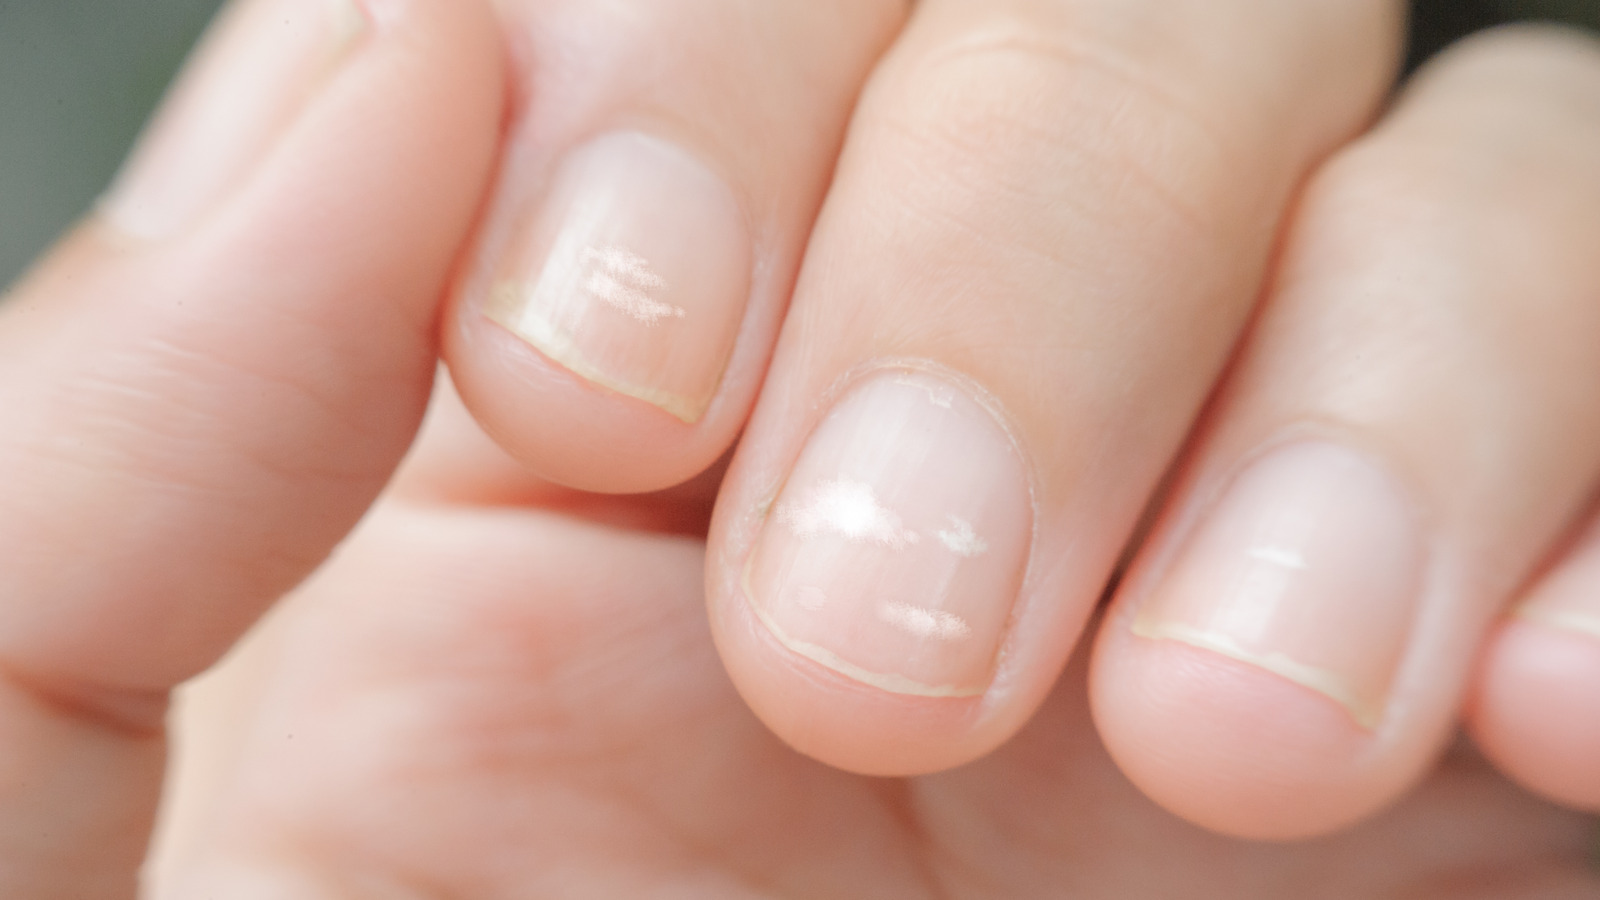 Do the white spots on some of my nails indicate a deficiency? - Quora